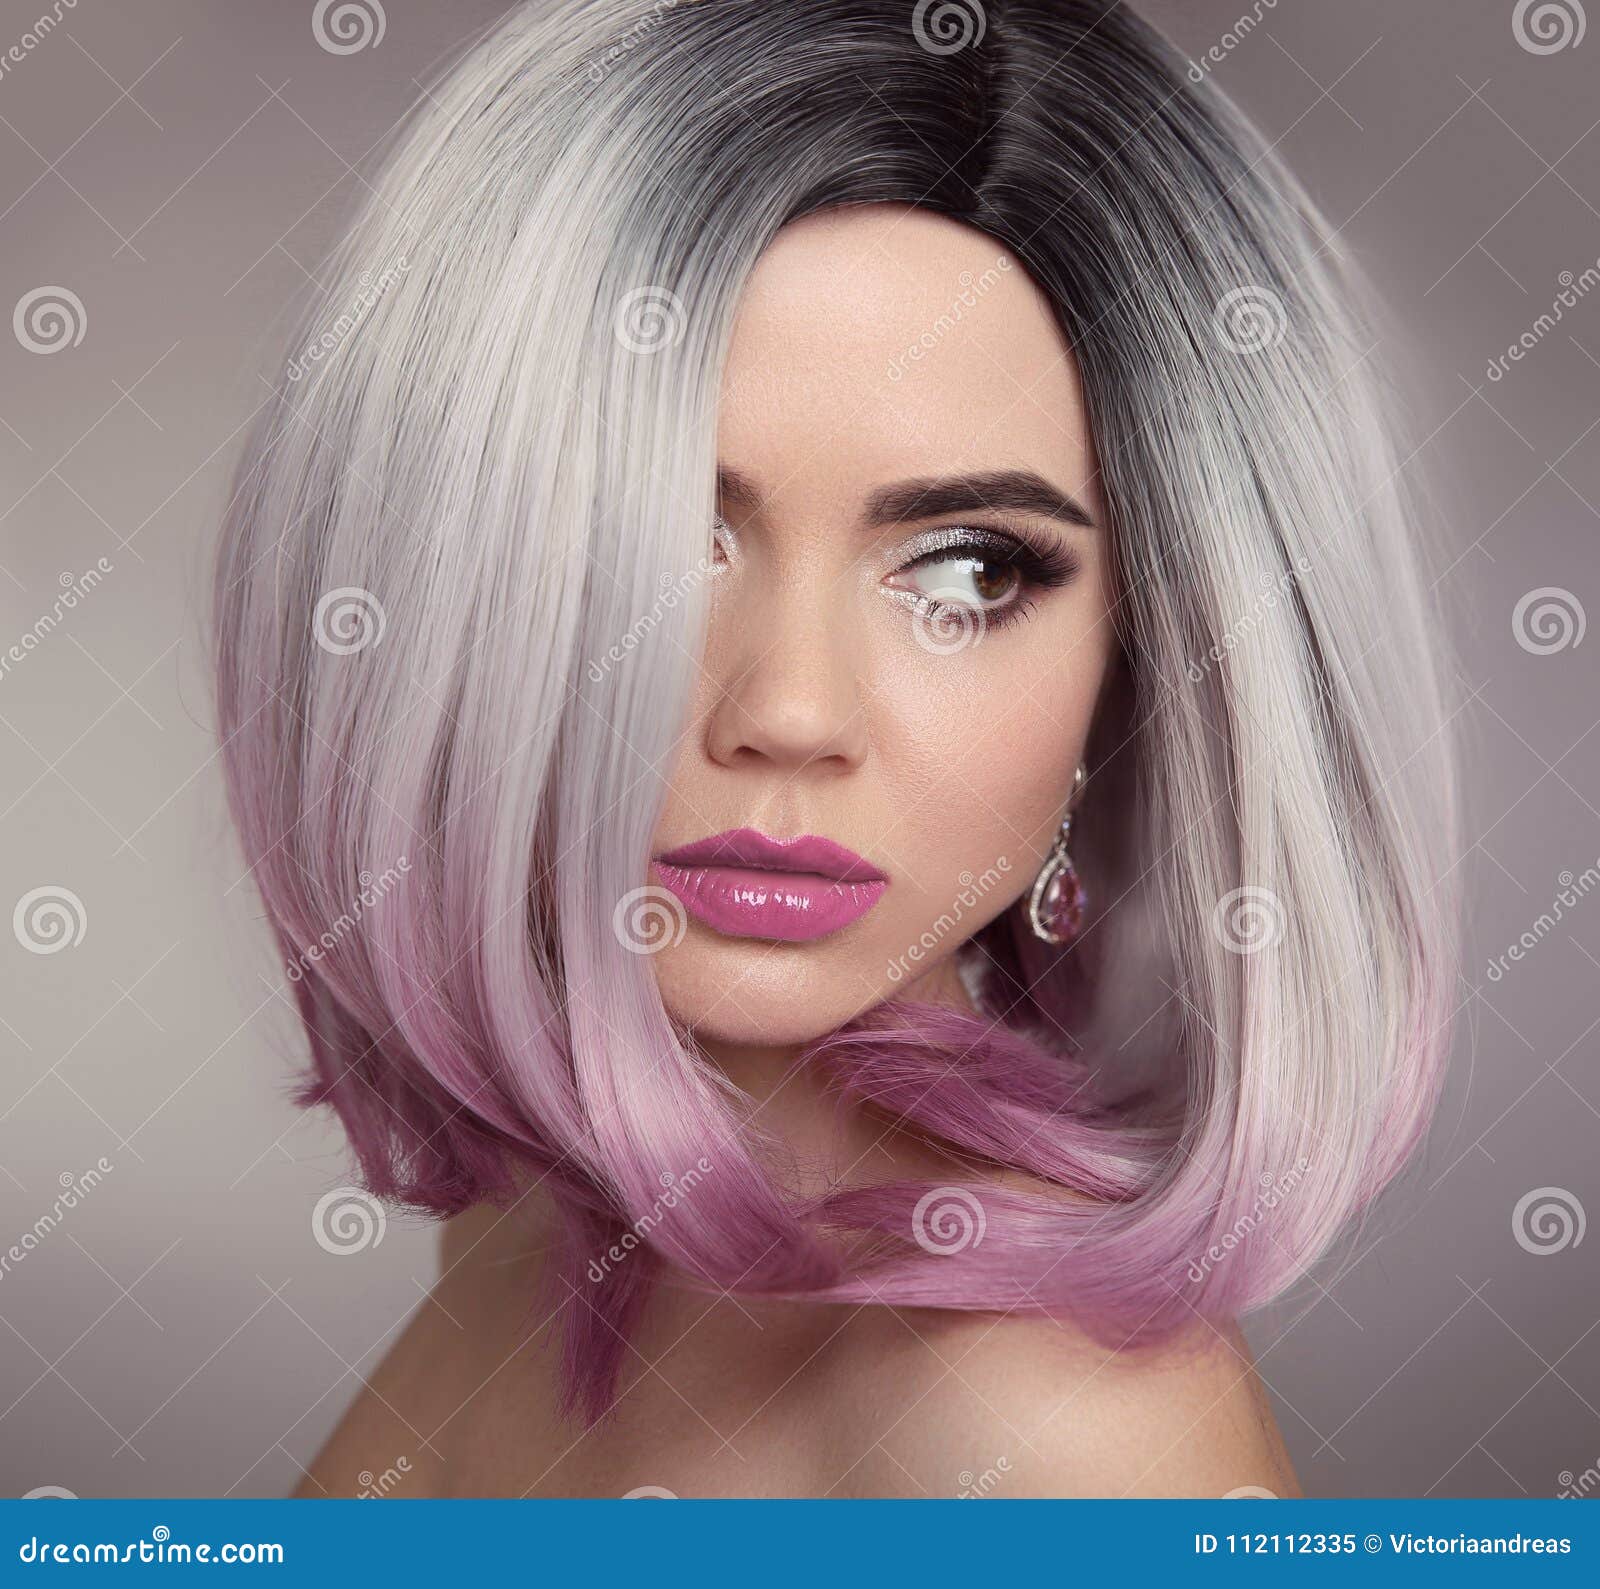 Ombre Bob Hairstyle Blonde Girl Portrait. Purple Makeup. Beautiful Hair  Coloring Woman. Fashion Trendy Haircut Stock Image - Image of face,  attractive: 112112335